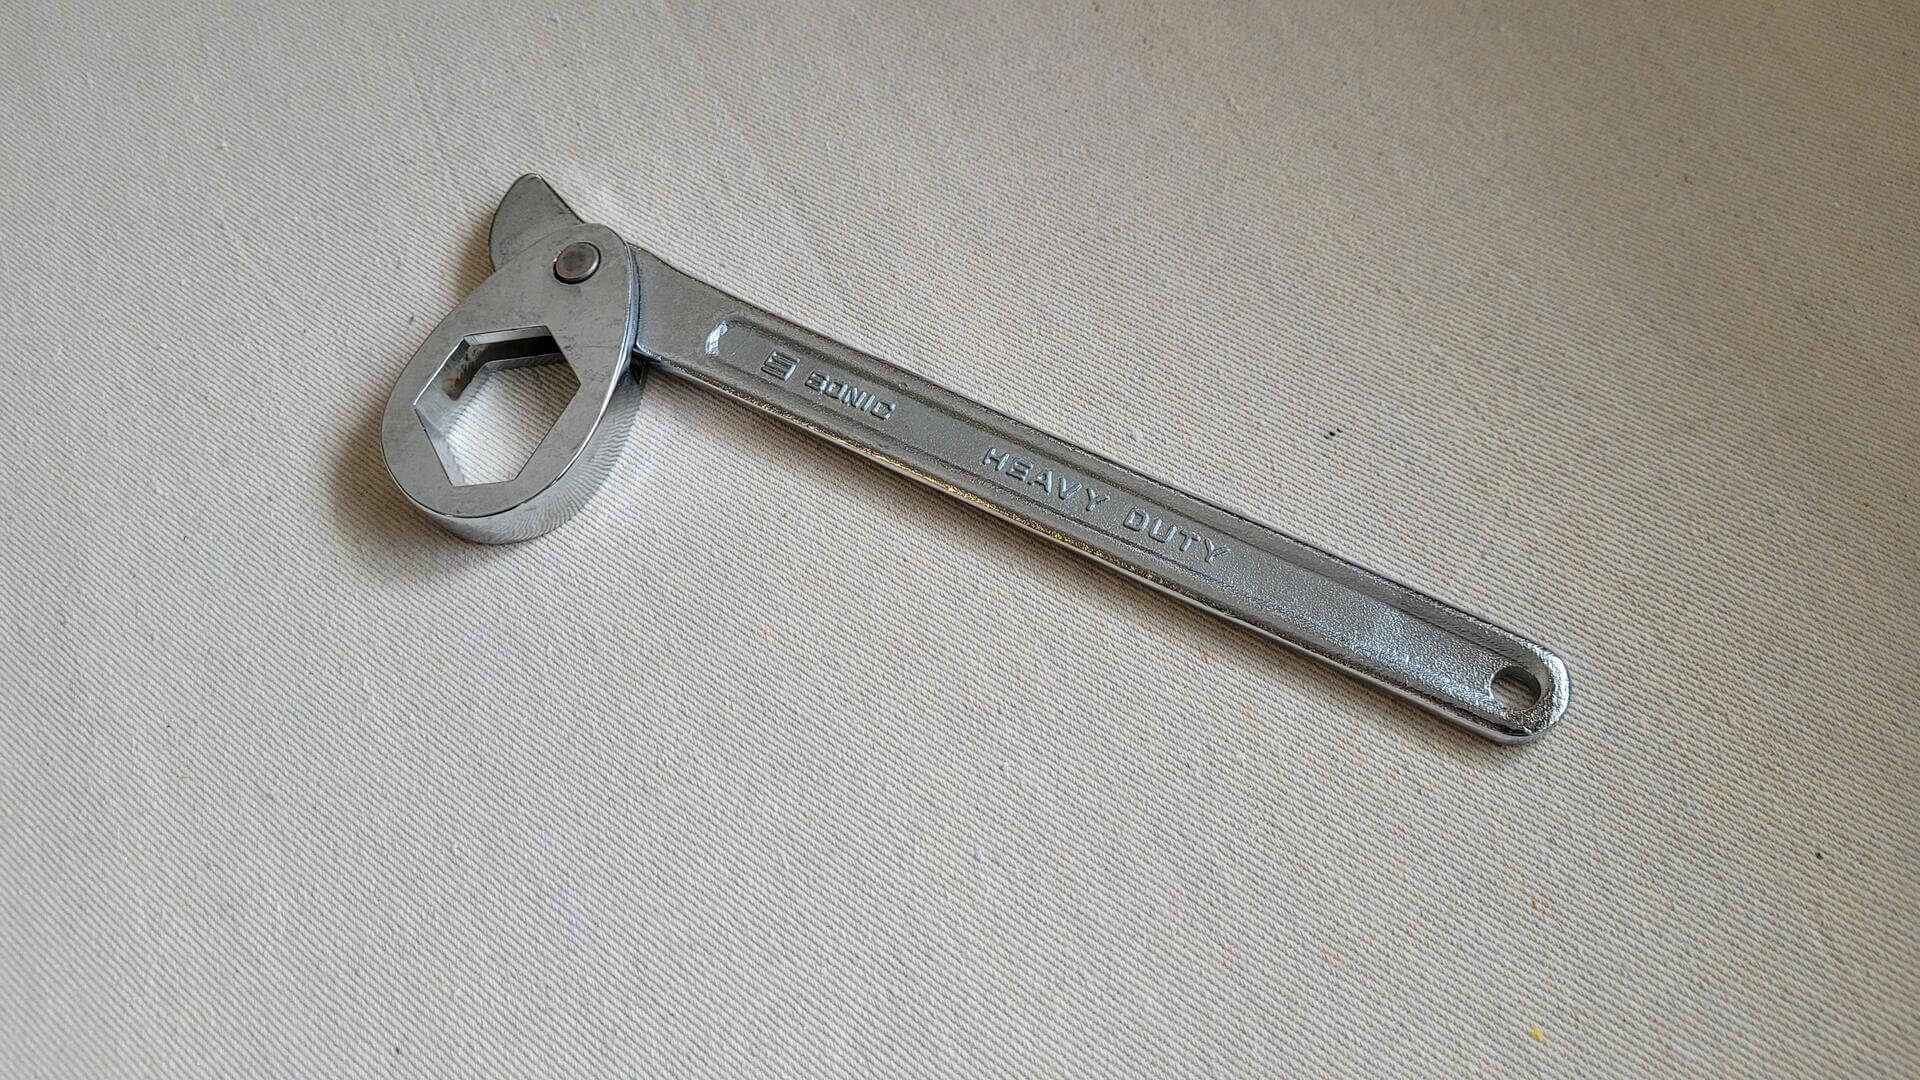 sonic-adjustable-multi-wrench-swivel-head-tool-23-32-vintage-collectible-automotive-mechanic-hand-tools-spanner